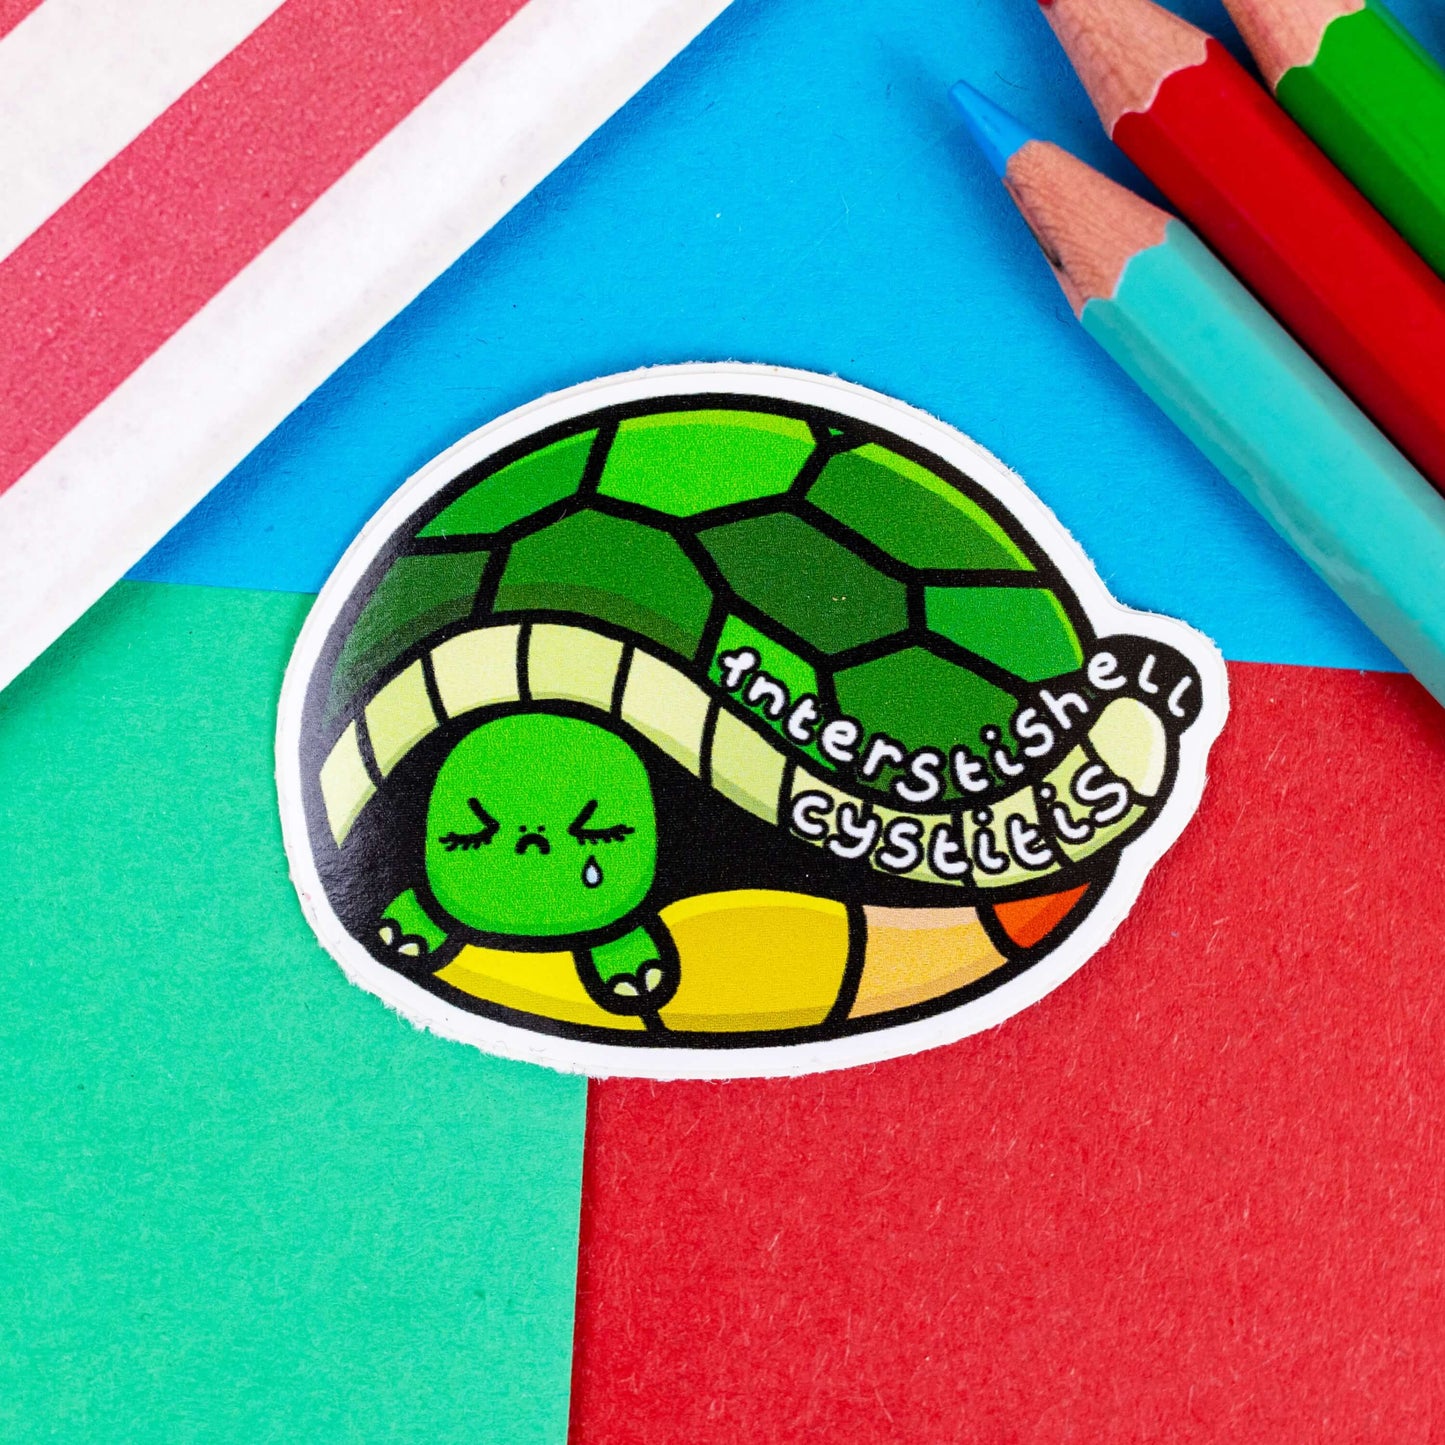 IC Interstishell cystitis sticker - IC Interstitial Cystitis. The sticker is of a tortoise hiding in its shell looking sad with text saying interstishell cystitis on its shell.  It is on a red, blue and green background with coloured pencils to one side and a stripy paper bag.